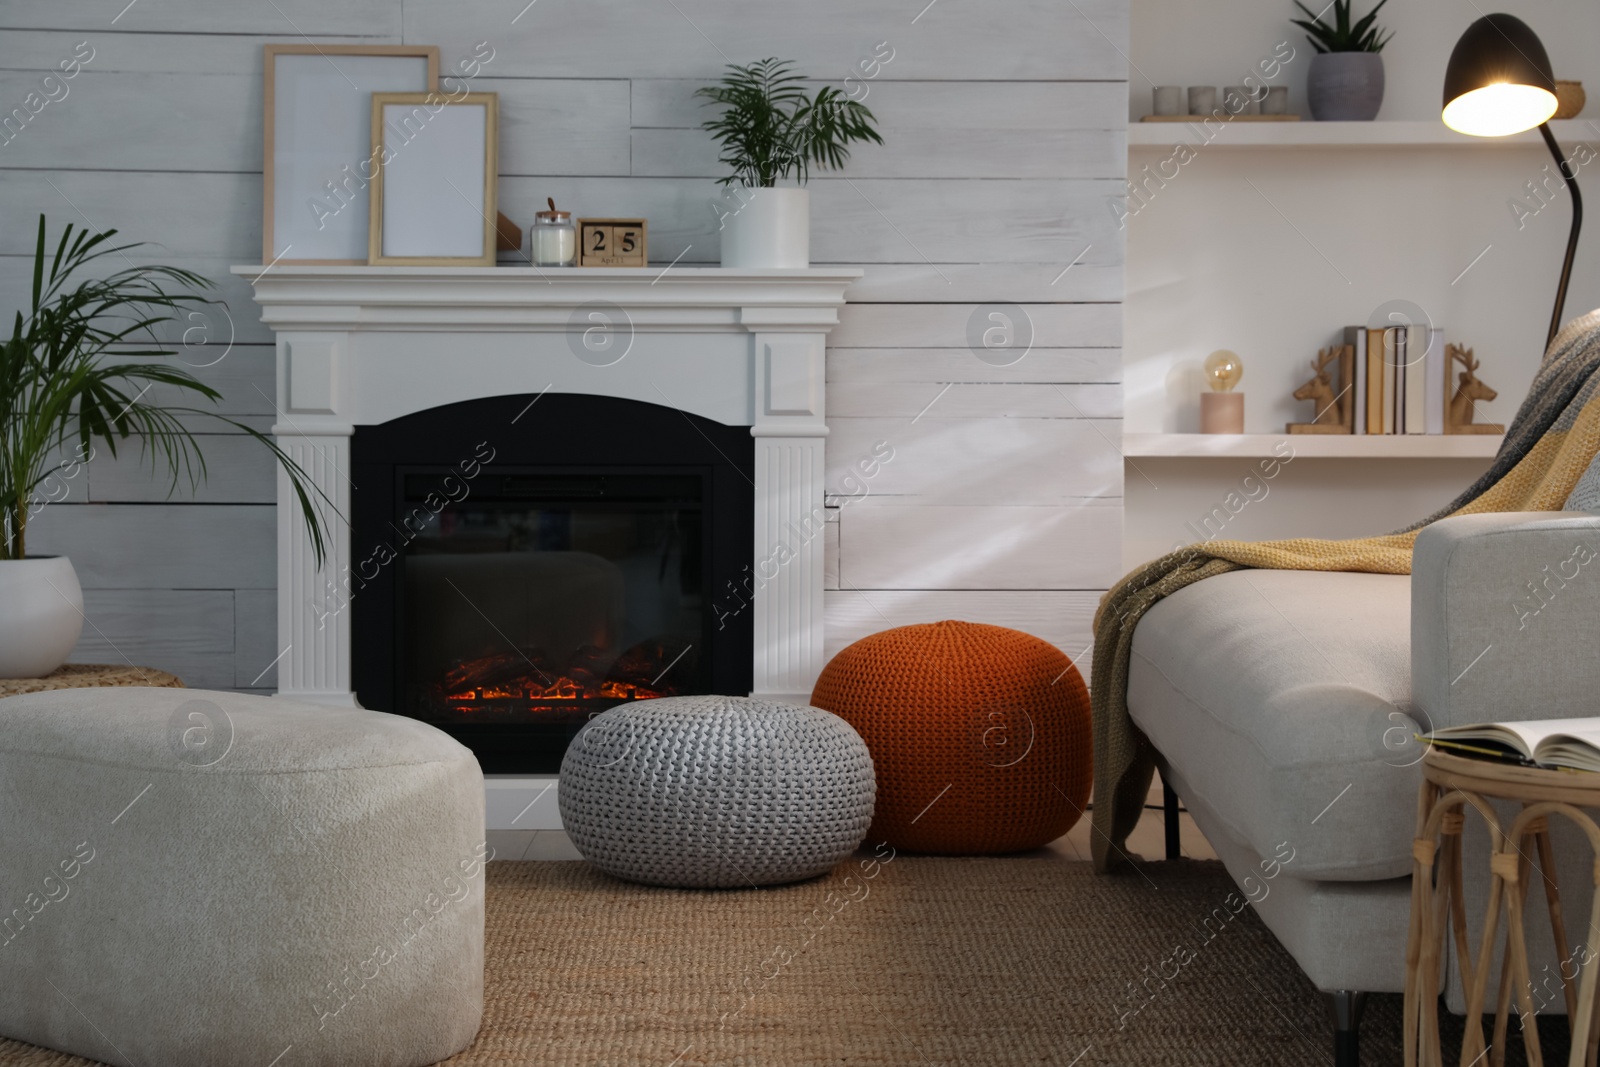 Photo of Stylish comfortable poufs near sofa in room. Home design